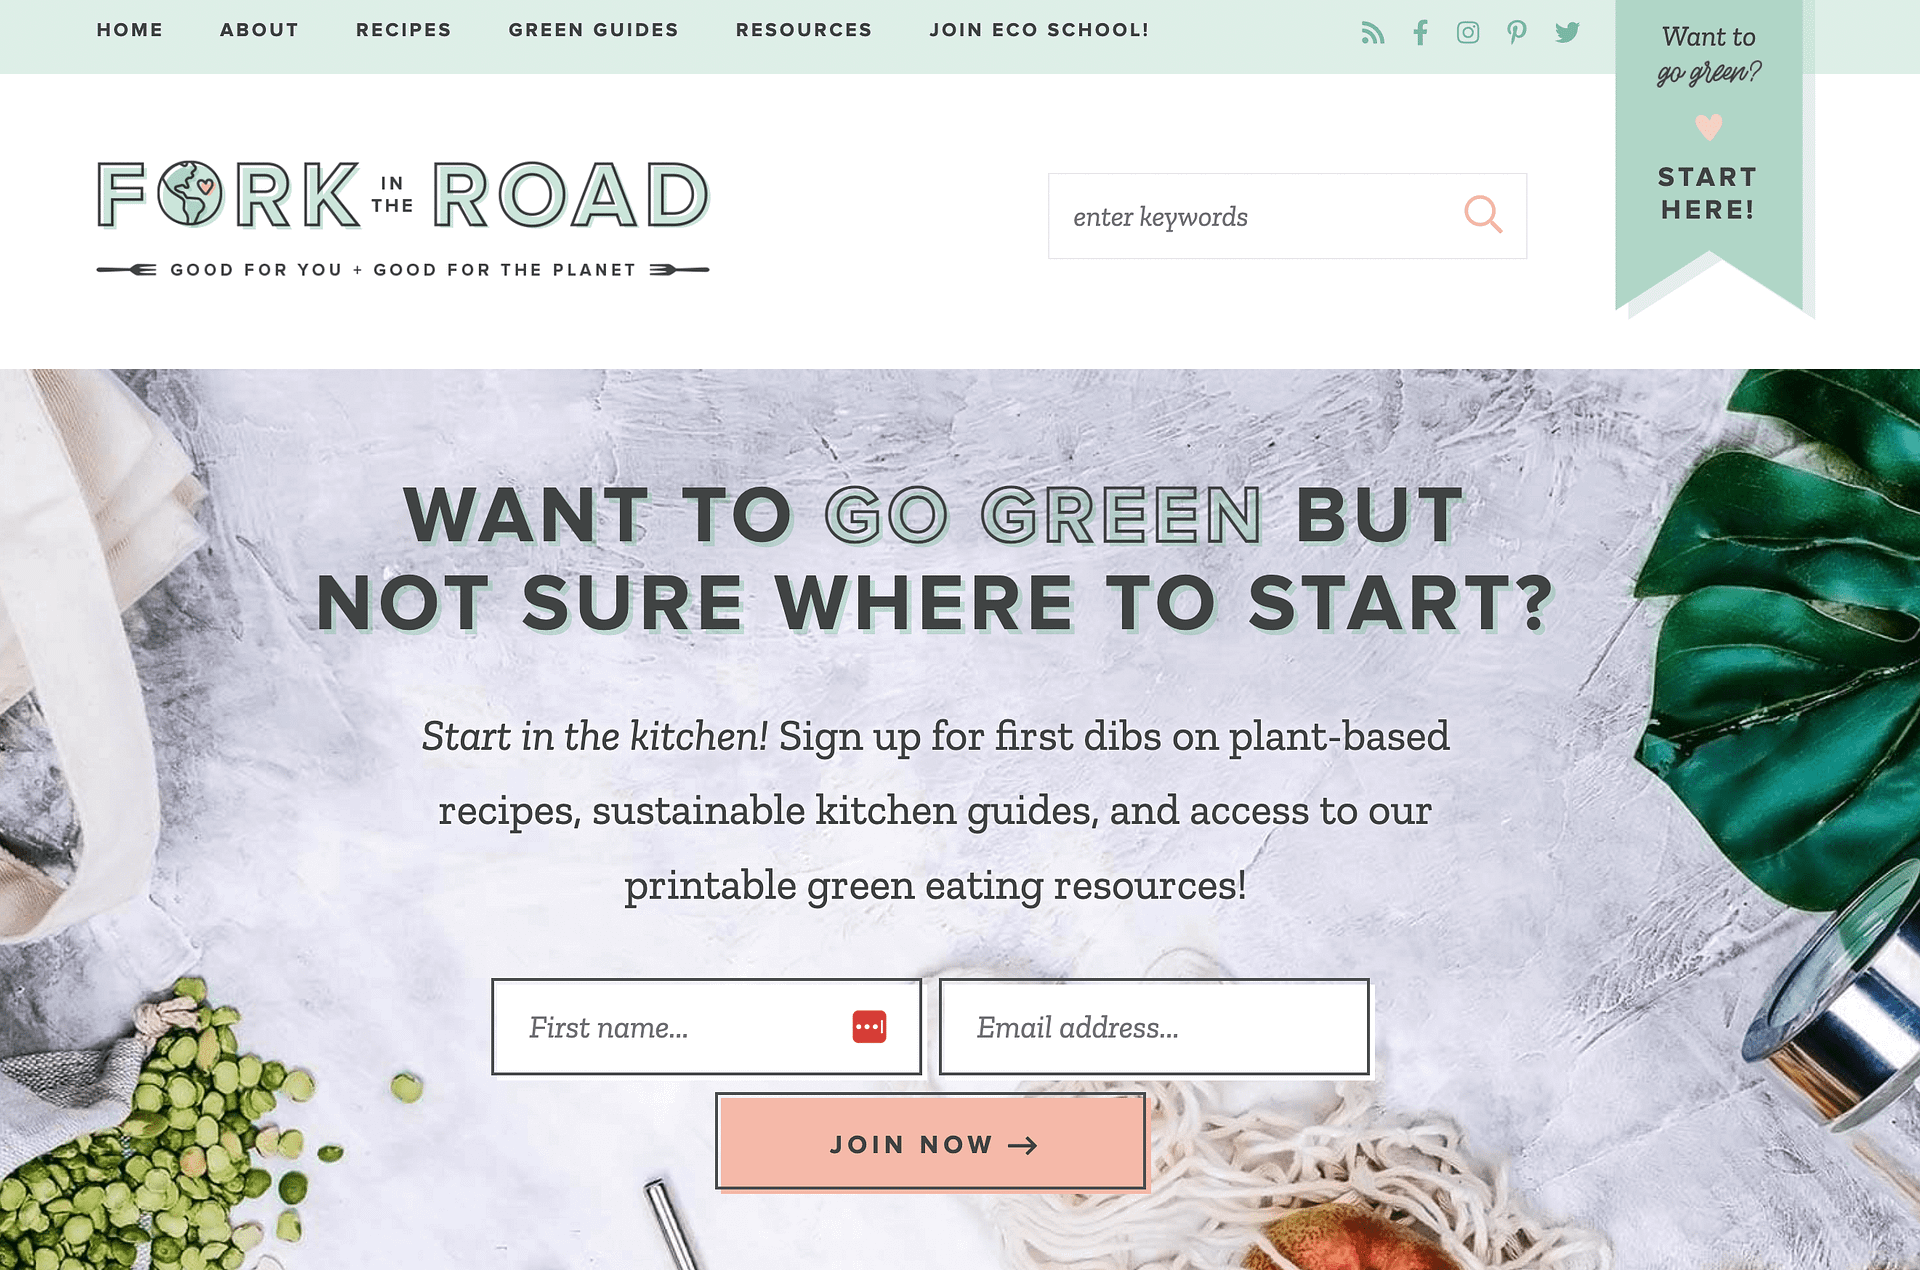 Fork in the Road is one of the most prominent sustainability blogs focused on food.